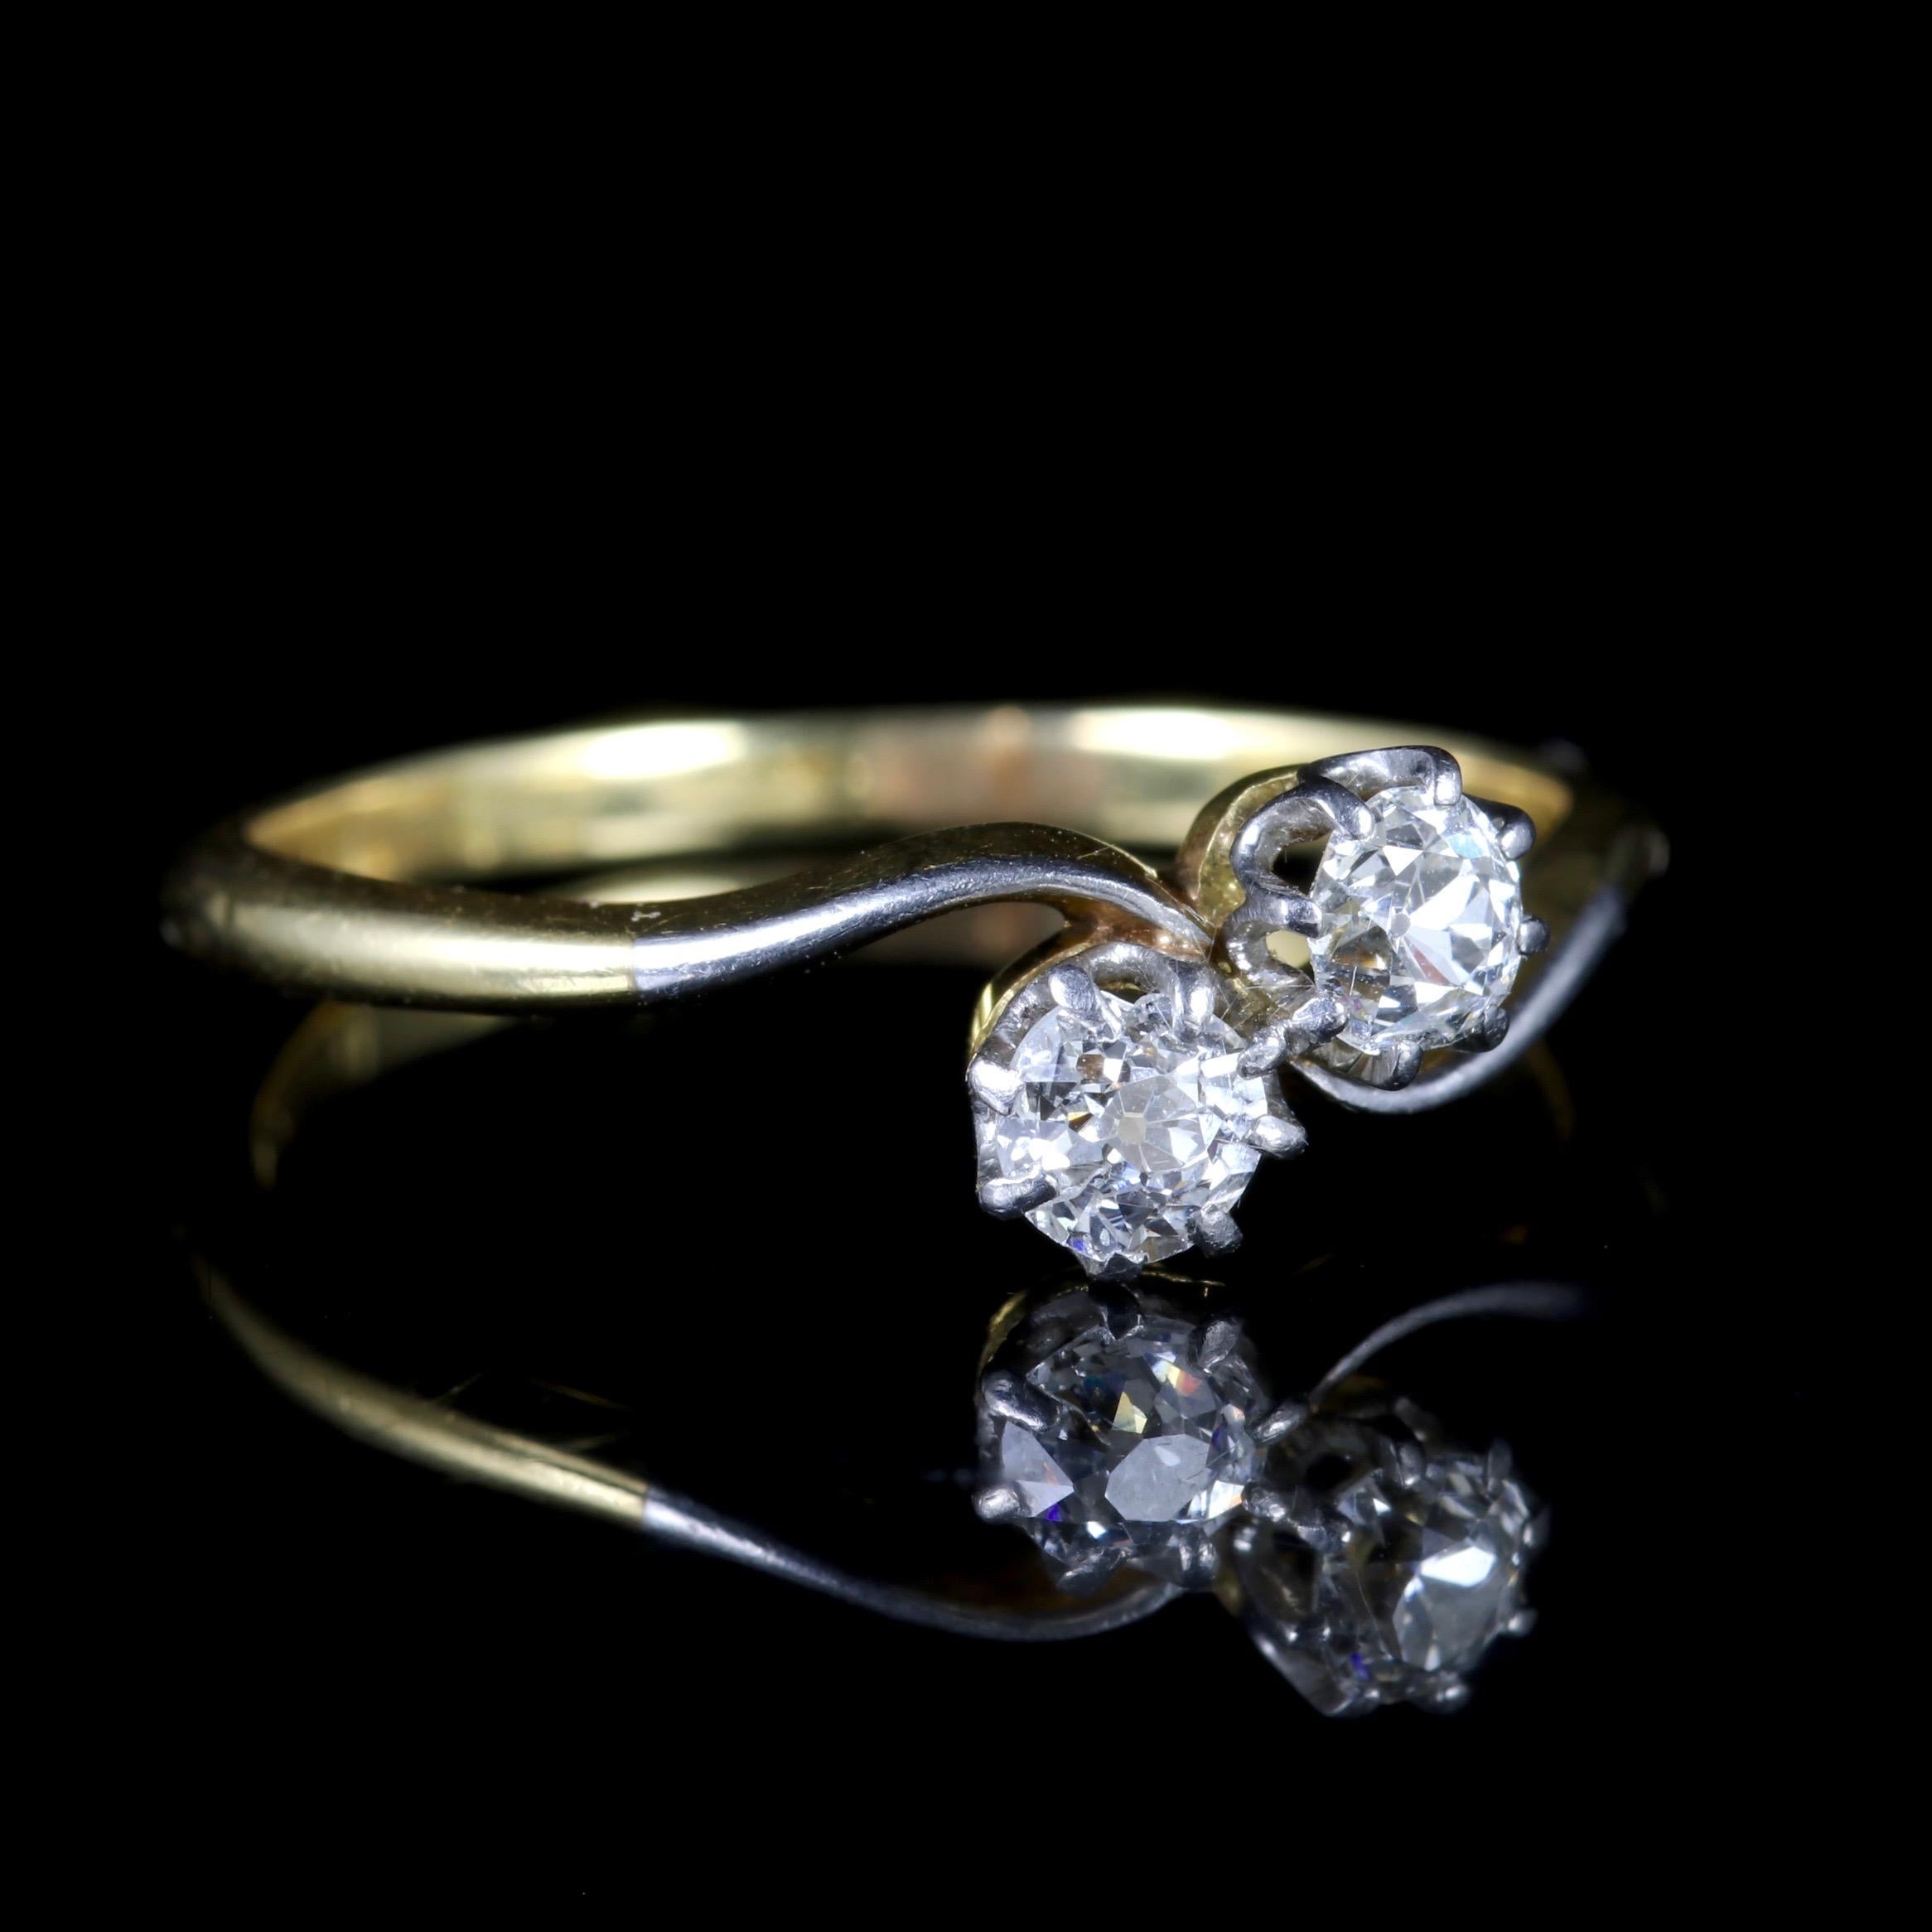 This elegant Edwardian Diamond twist ring is, Circa 1910.

The ring boasts two sparkling old cut Diamonds set in Platinum in a twist gallery.

There is approx 0.48ct in total, each Diamond is 0.24ct.

The Diamonds are old cut, and glisten